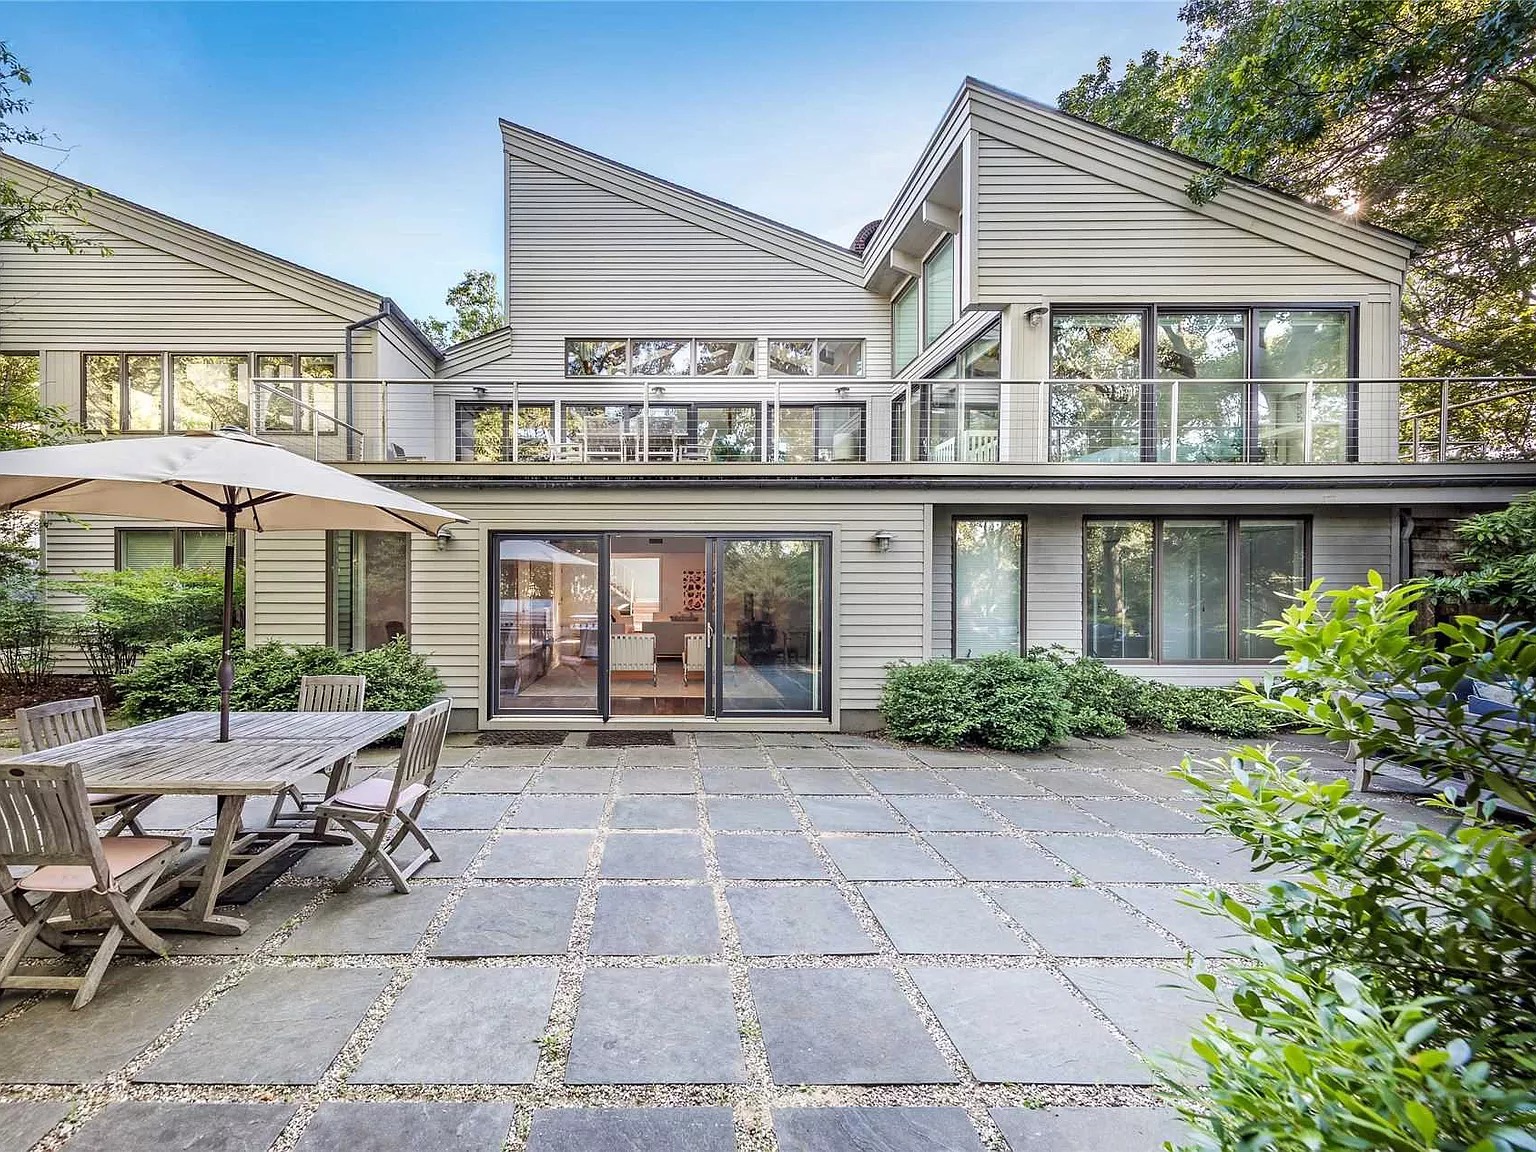 85 Oyster Shores Rd, East Hampton, NY 11937 - $3,999,000 home for sale, house images, photos and pics gallery